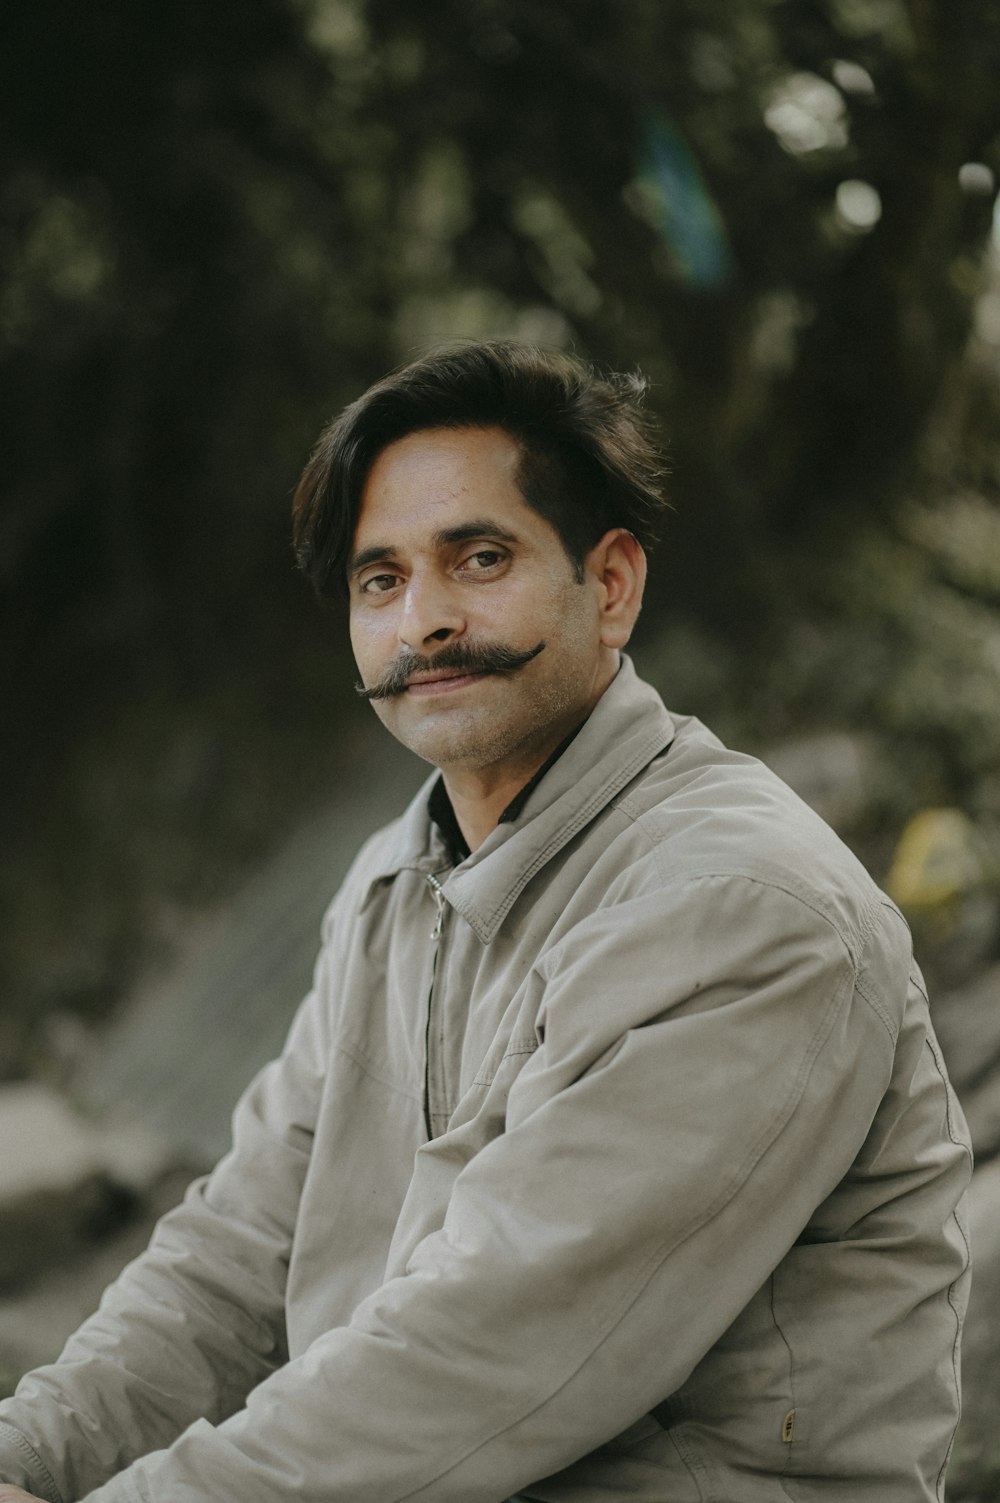 a man with a mustache sitting on a bench